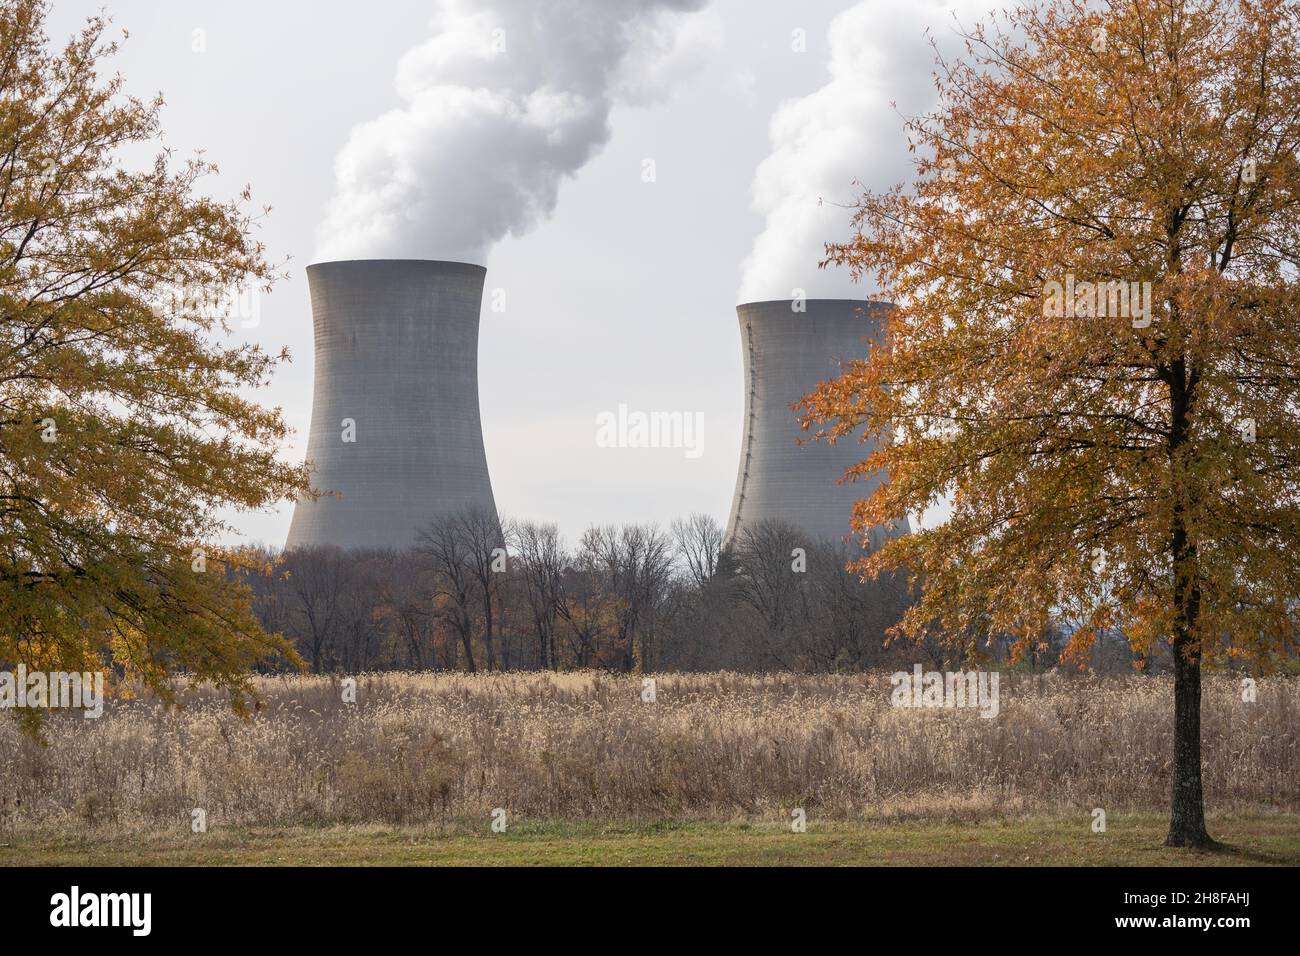 Montgomery County, Pennsylvania, U.S.A – November 19, 2021 - A view of the Limerick Generating Station is located northwest of Philadelphia, Pennsylva Stock Photo